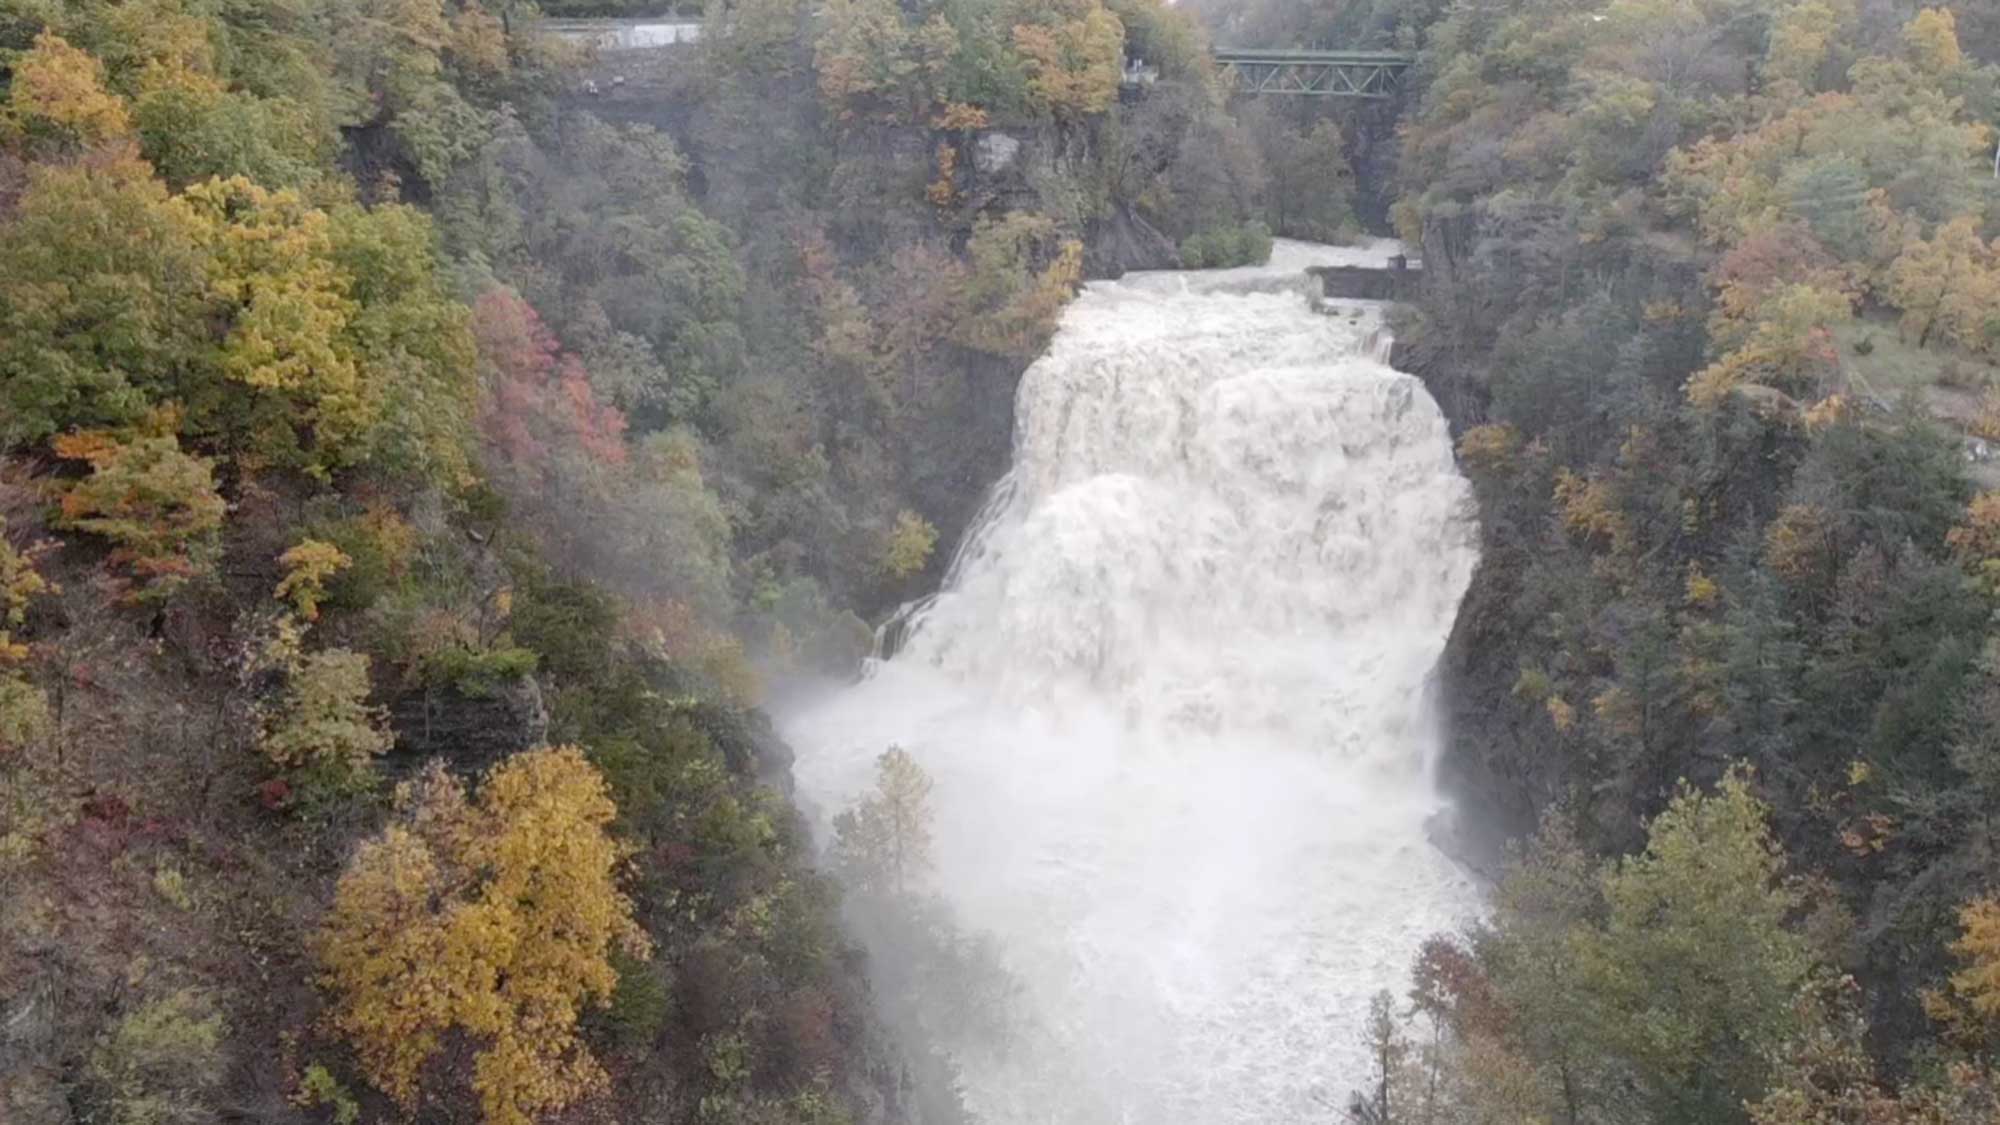 Photograph of Ithaca Falls captured at a time of very high water flow.